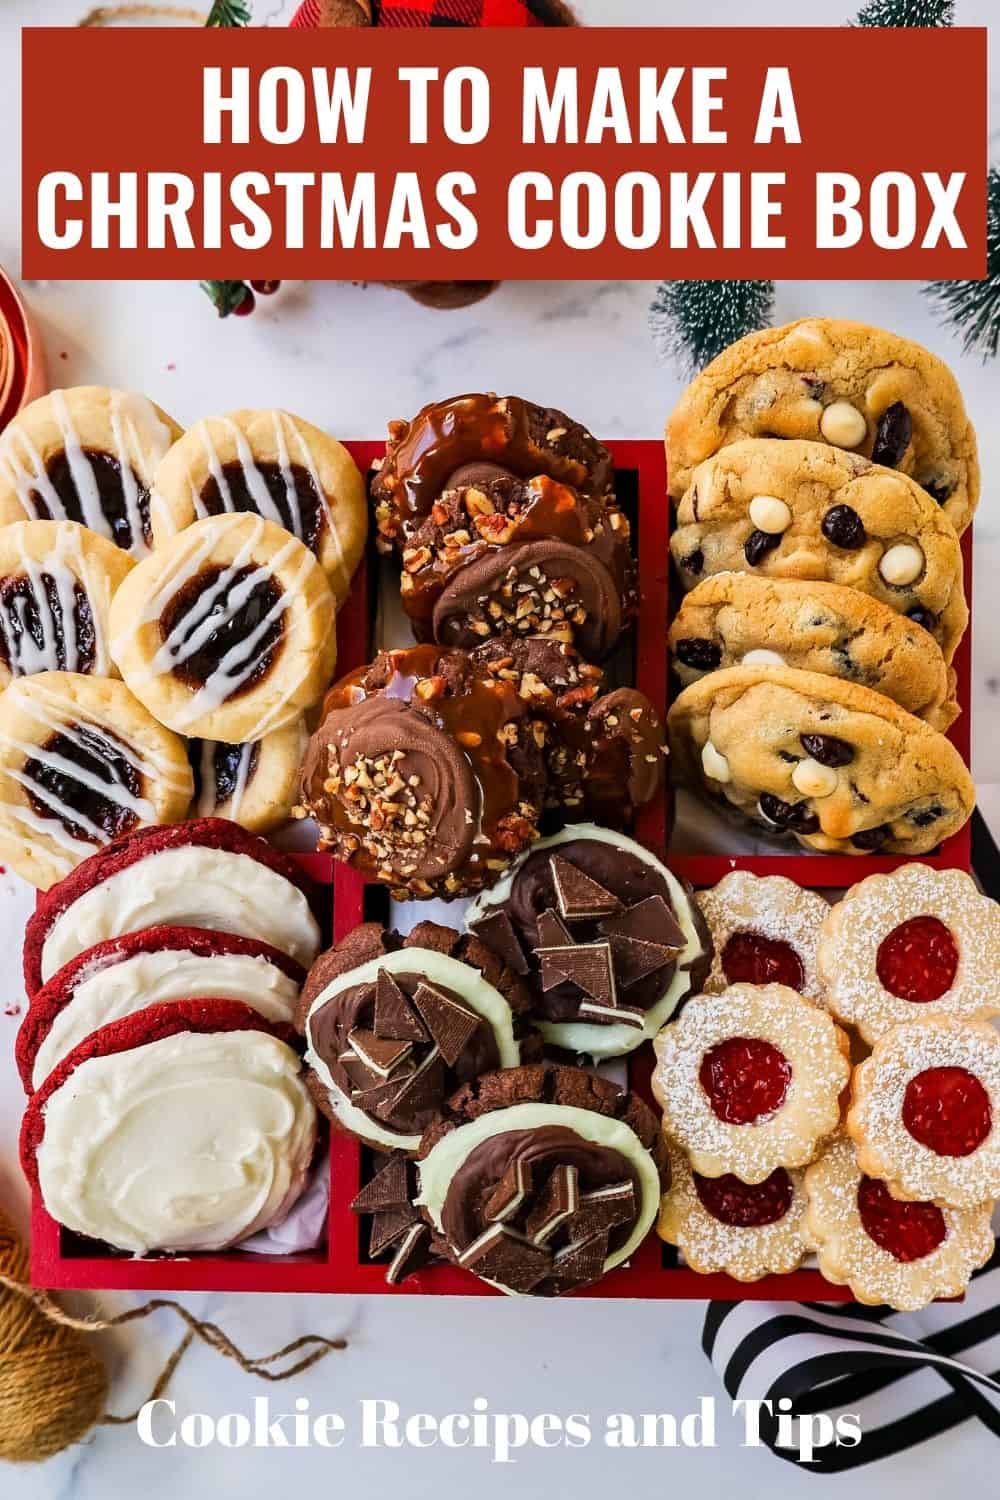 How to make a Christmas Cookie Box. Cookie recipes and tips and tricks for making a festive cookie box for Christmas.